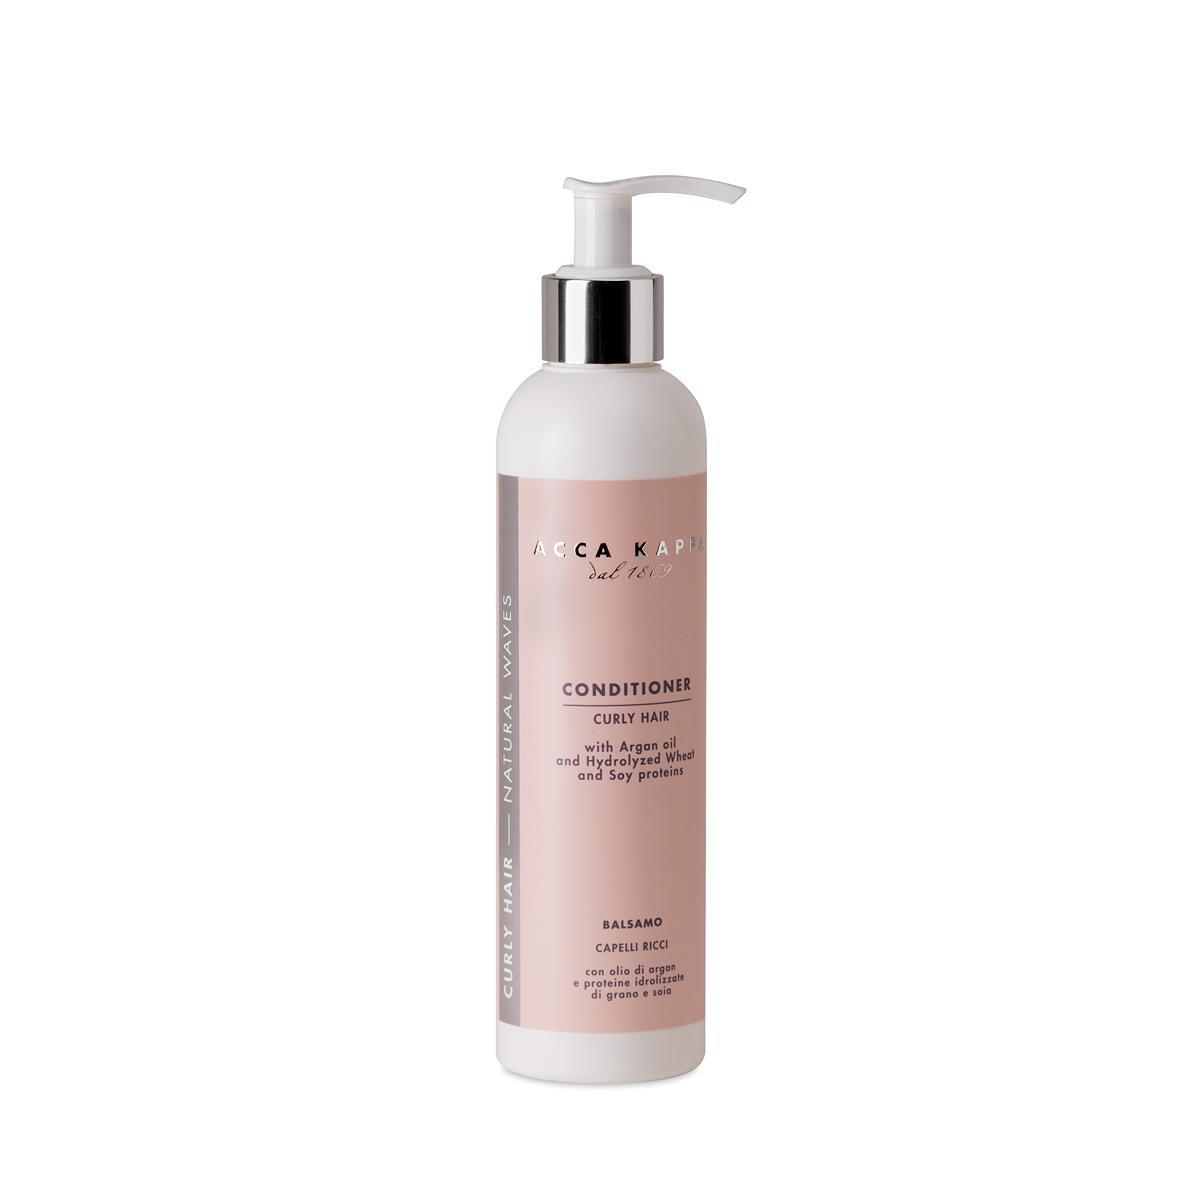 ACCA KAPPA Curly Hair Conditioner and Mask - 250ml